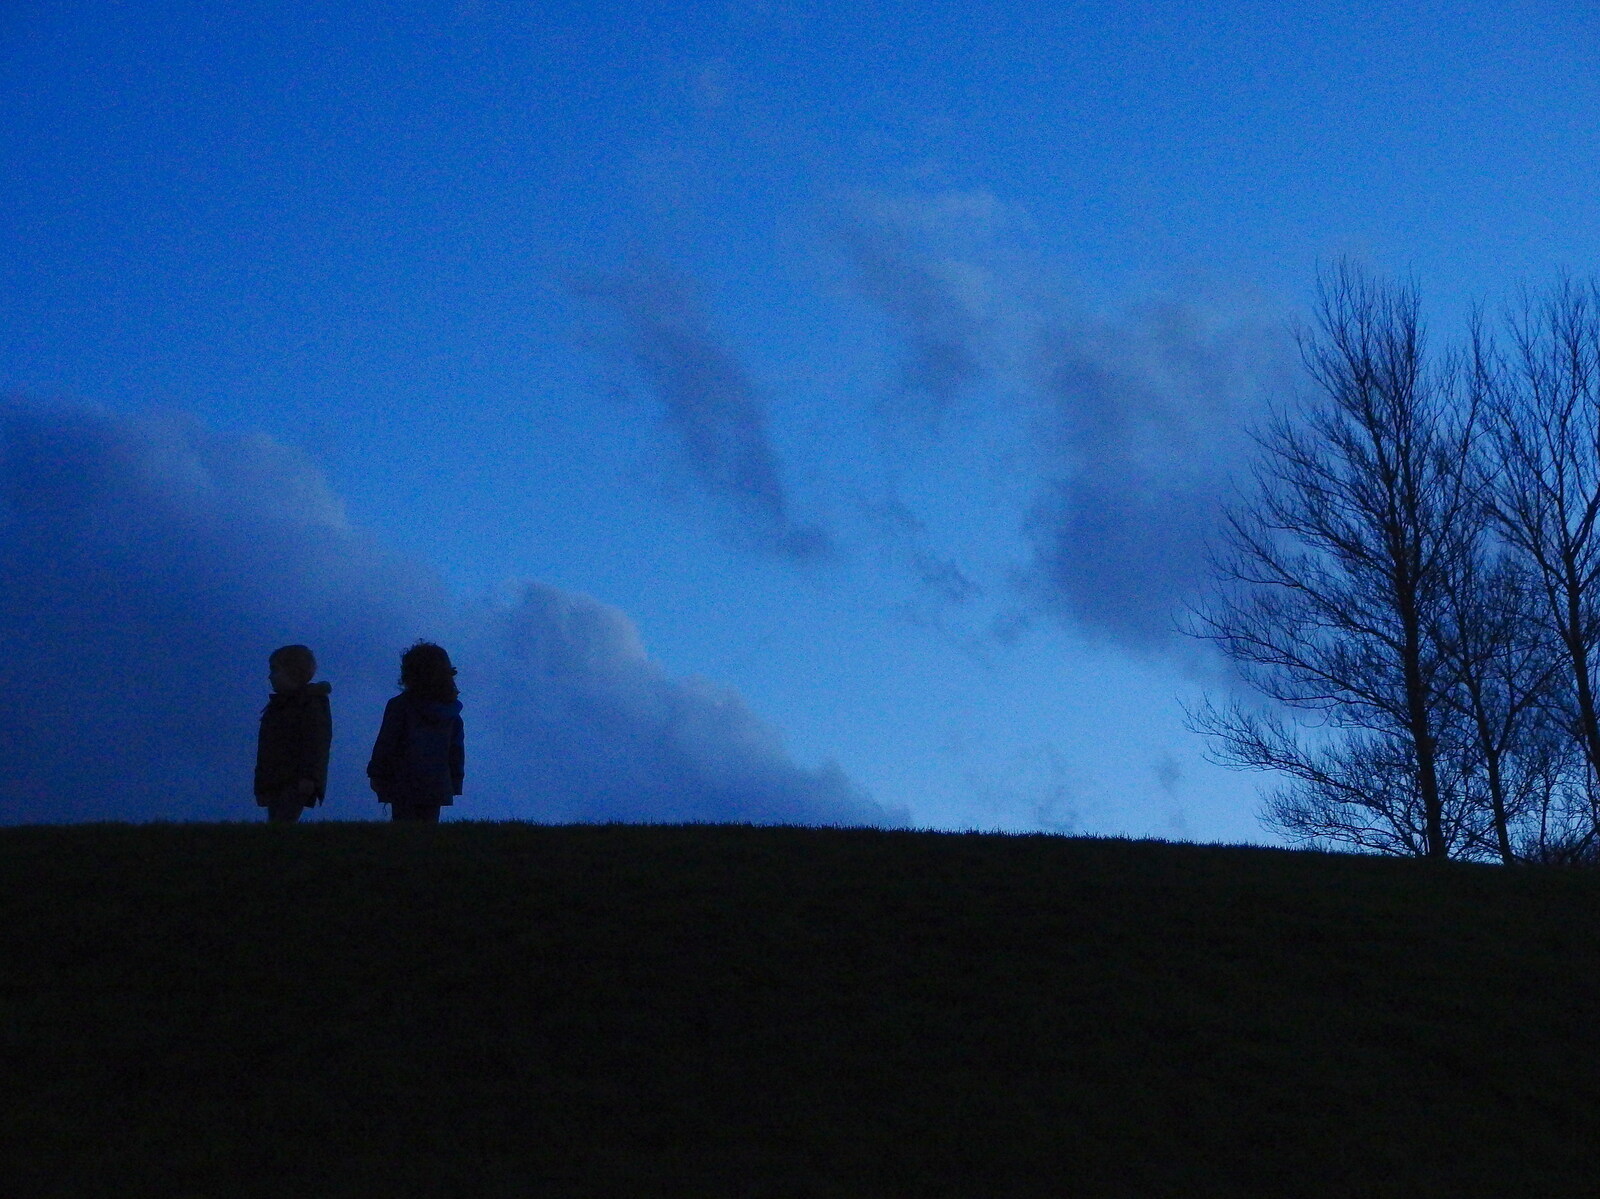 Fern and Fred silhouetted against the dusk from Dun Laoghaire and an Electrical Disaster, Monkstown, County Dublin, Ireland - 4th January 2014